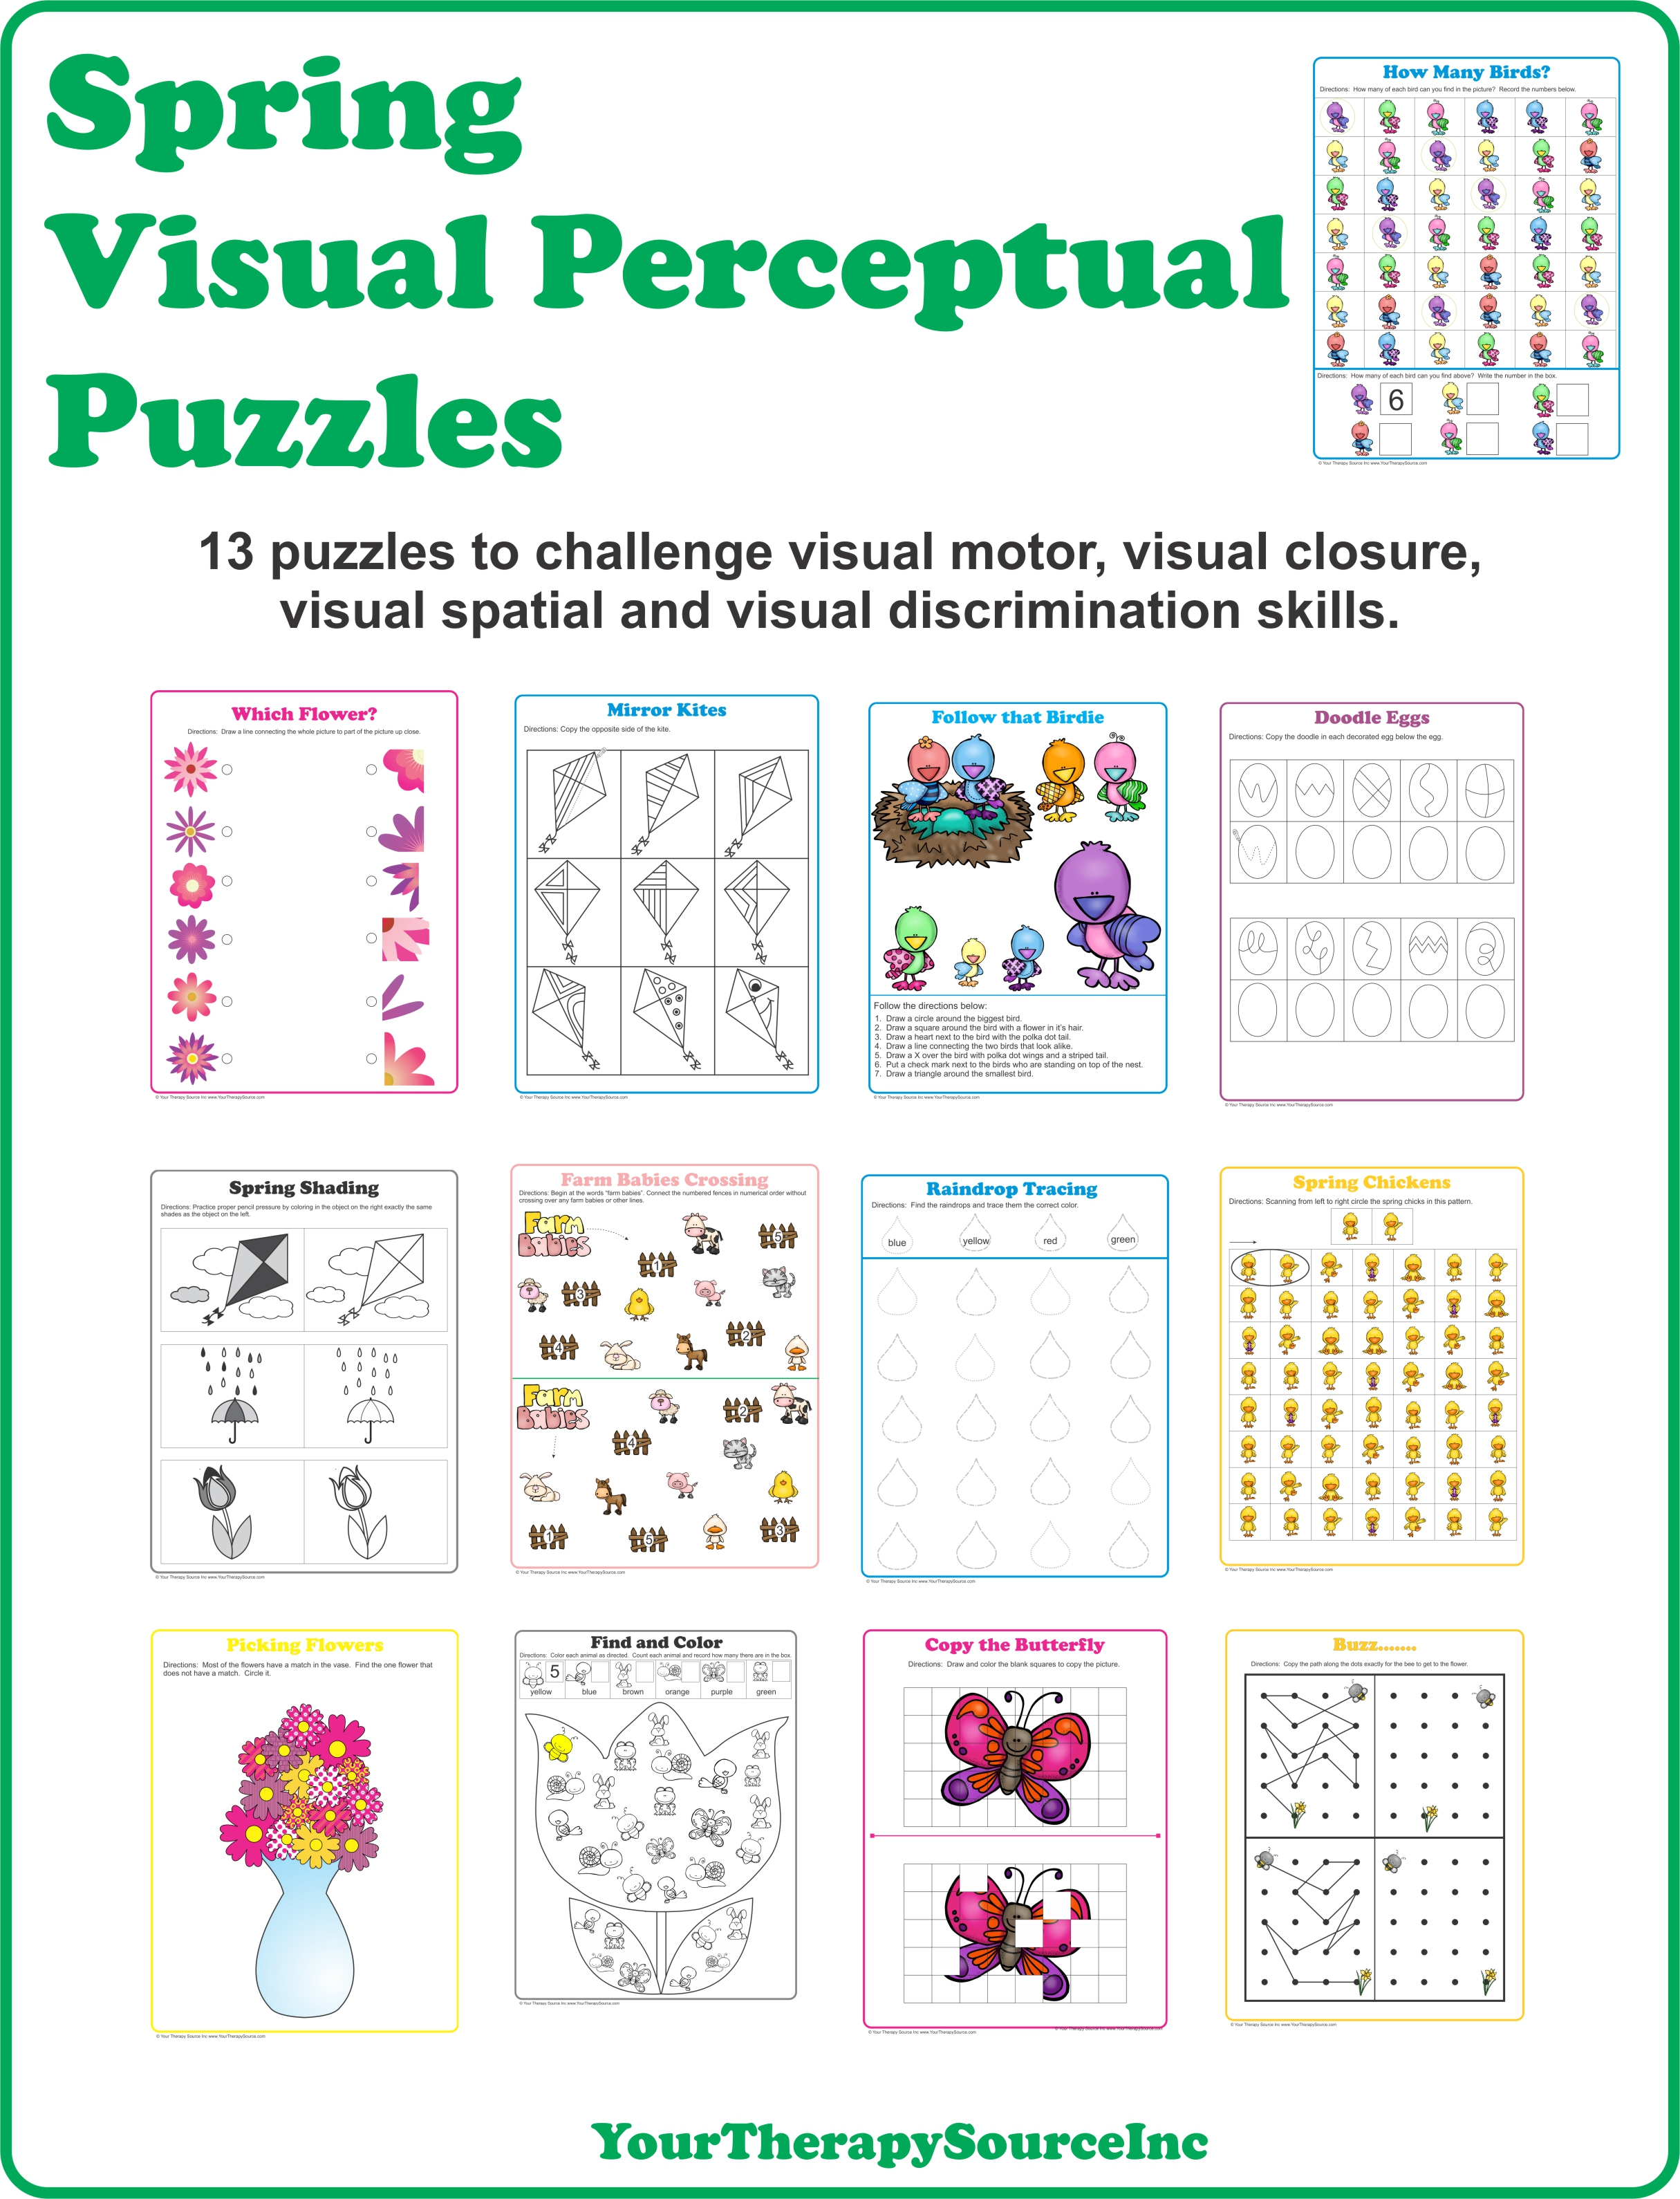 Spring Visual Perceptual Puzzles - Your Therapy Source - Free Printable Visual Puzzles